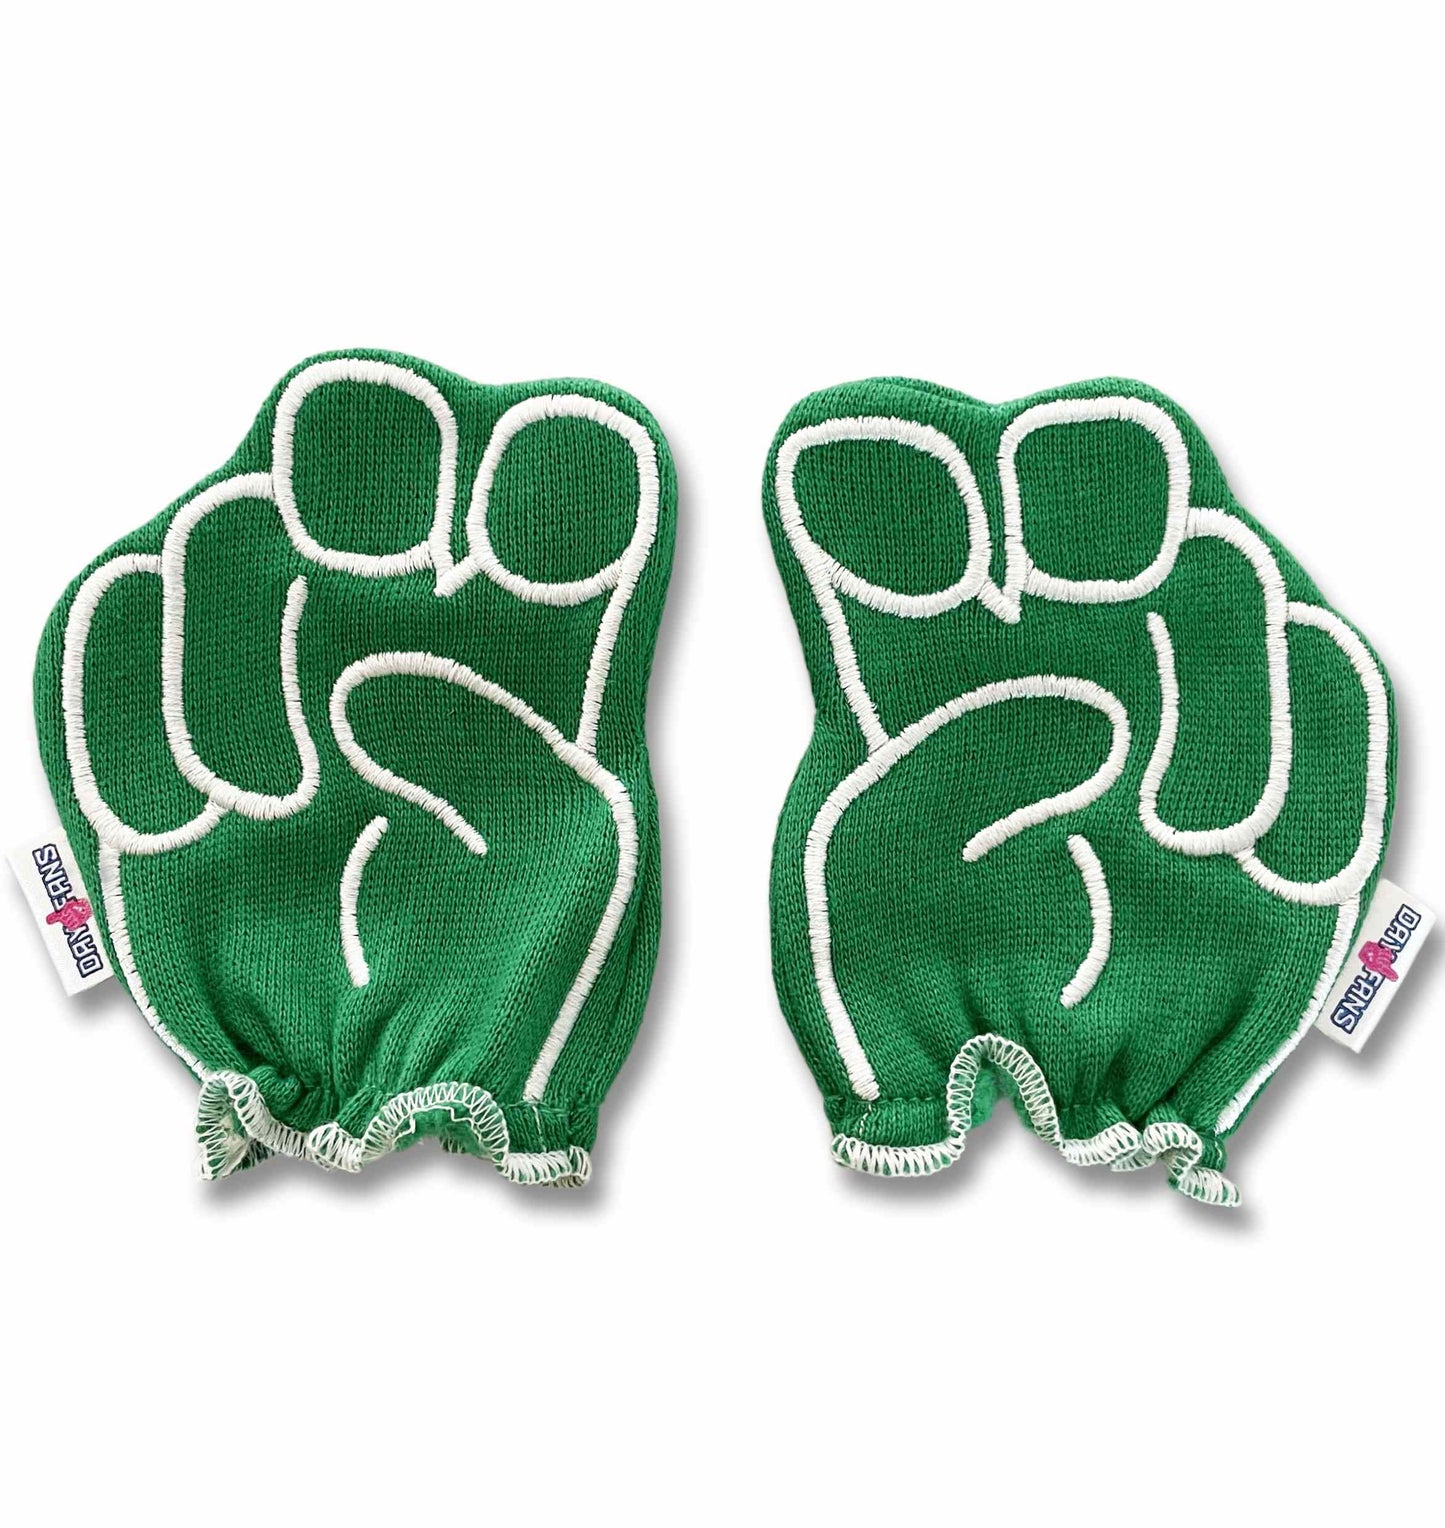 North Texas Mean Green FanMitts Baby Mittens Green Front Pair